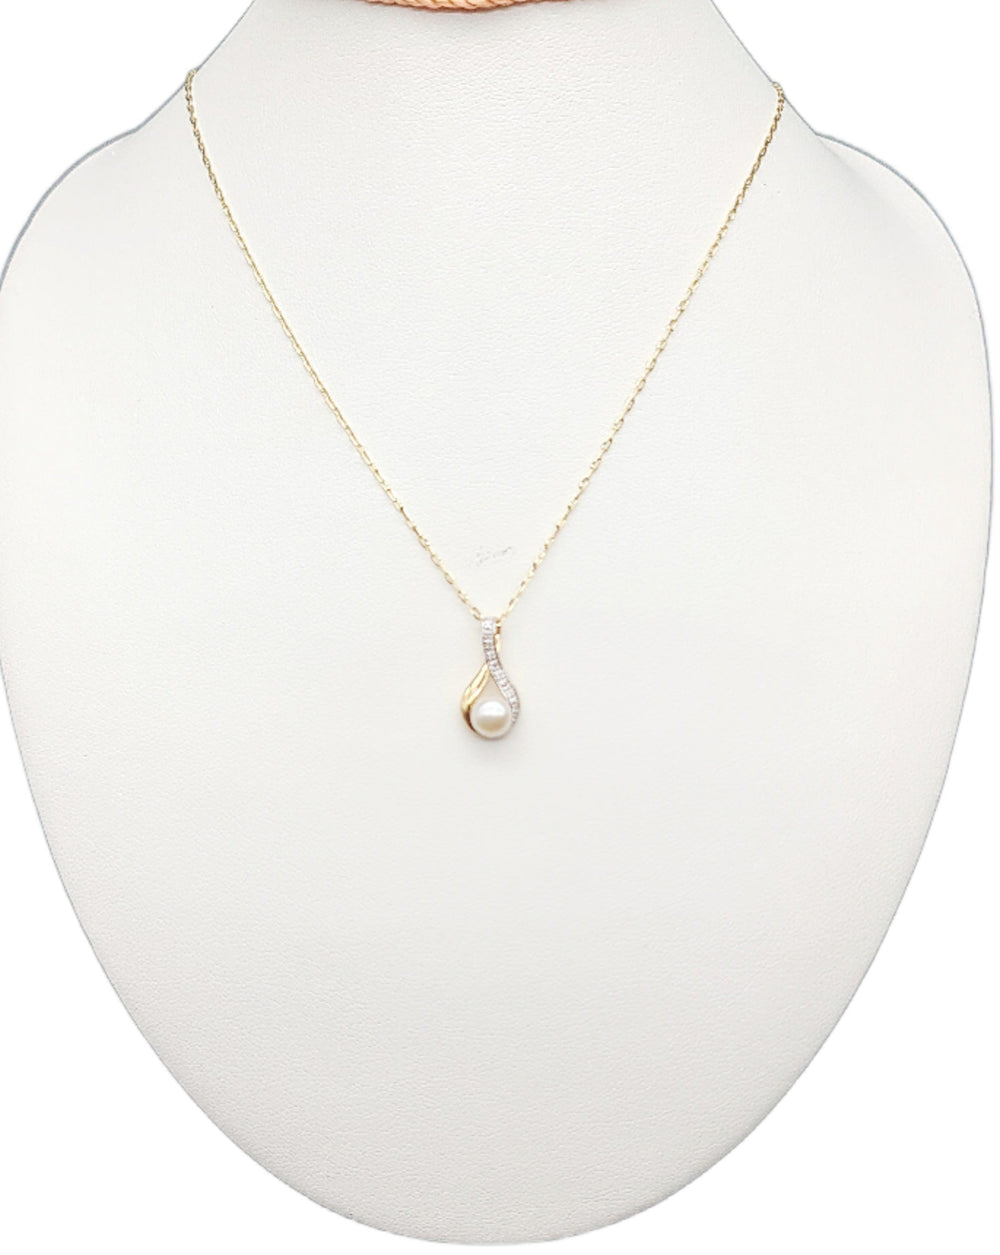 Necklace With Pearl In the Middle